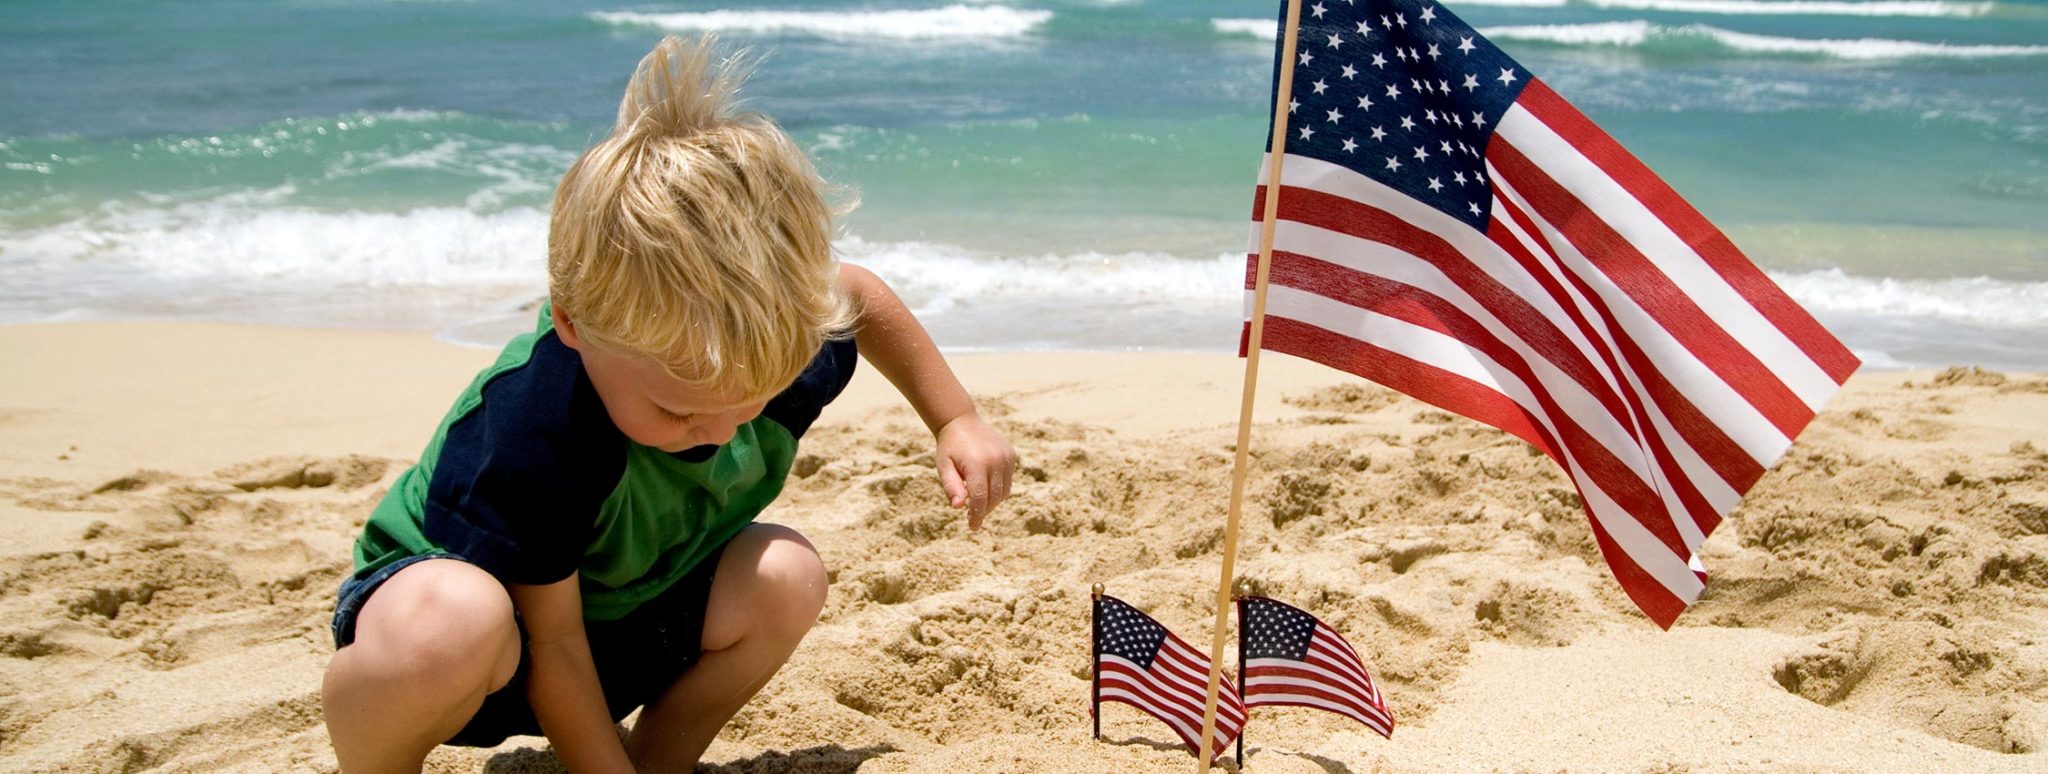 6 Incredible Destinations for 4th of July Celebrations